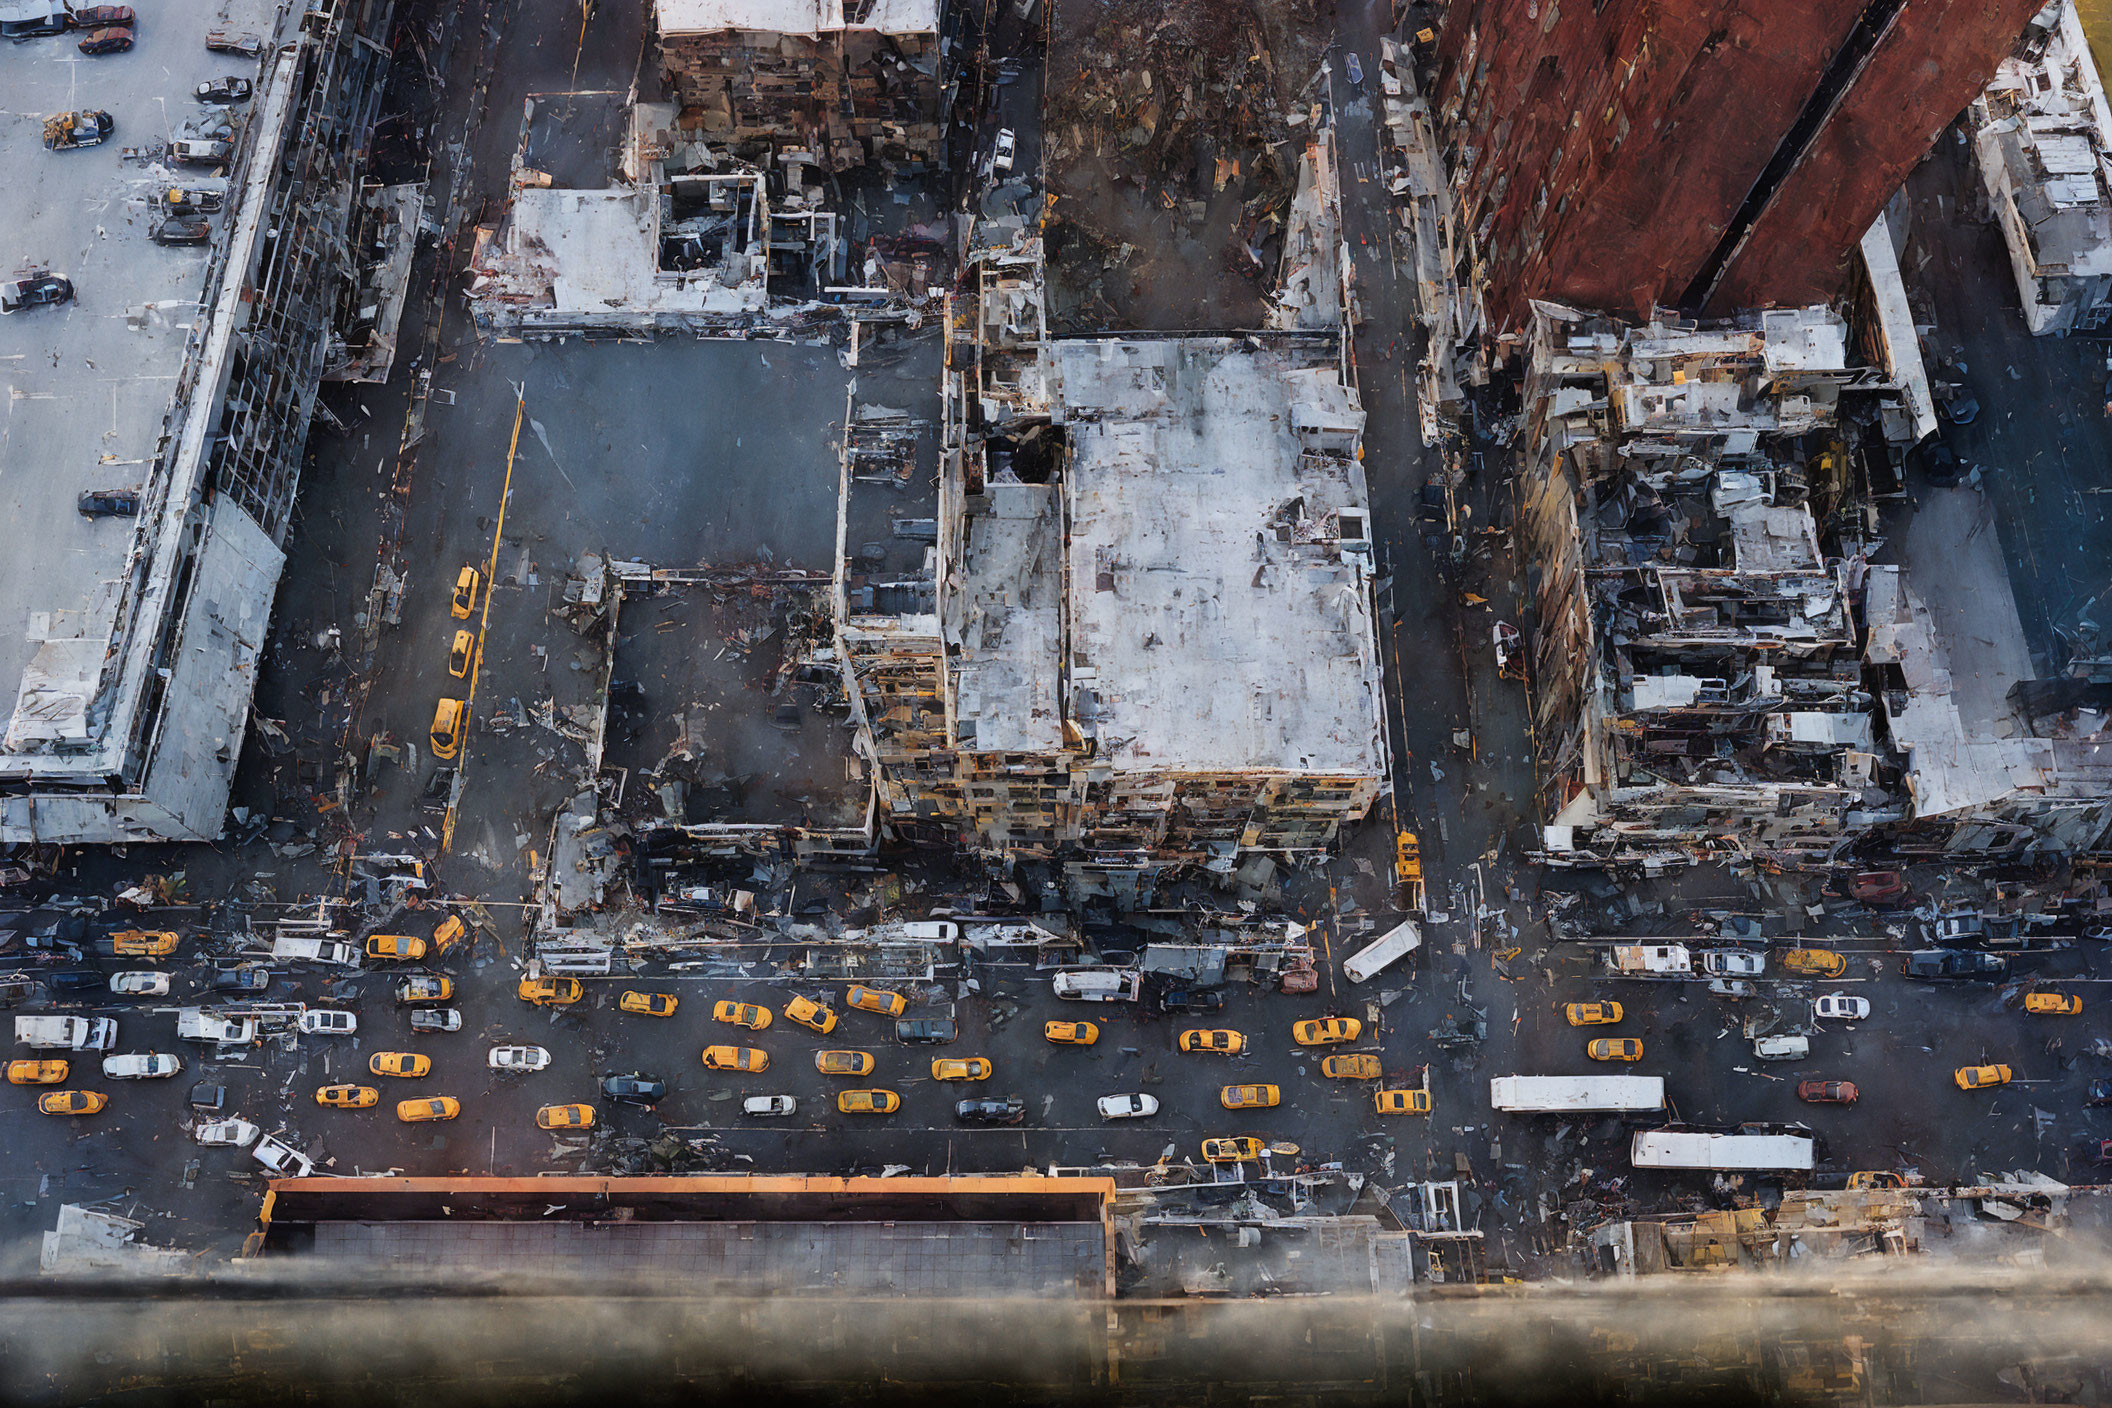 Urban Area with Burnt-Out Buildings, Yellow Taxis, and Debris Covered Streets